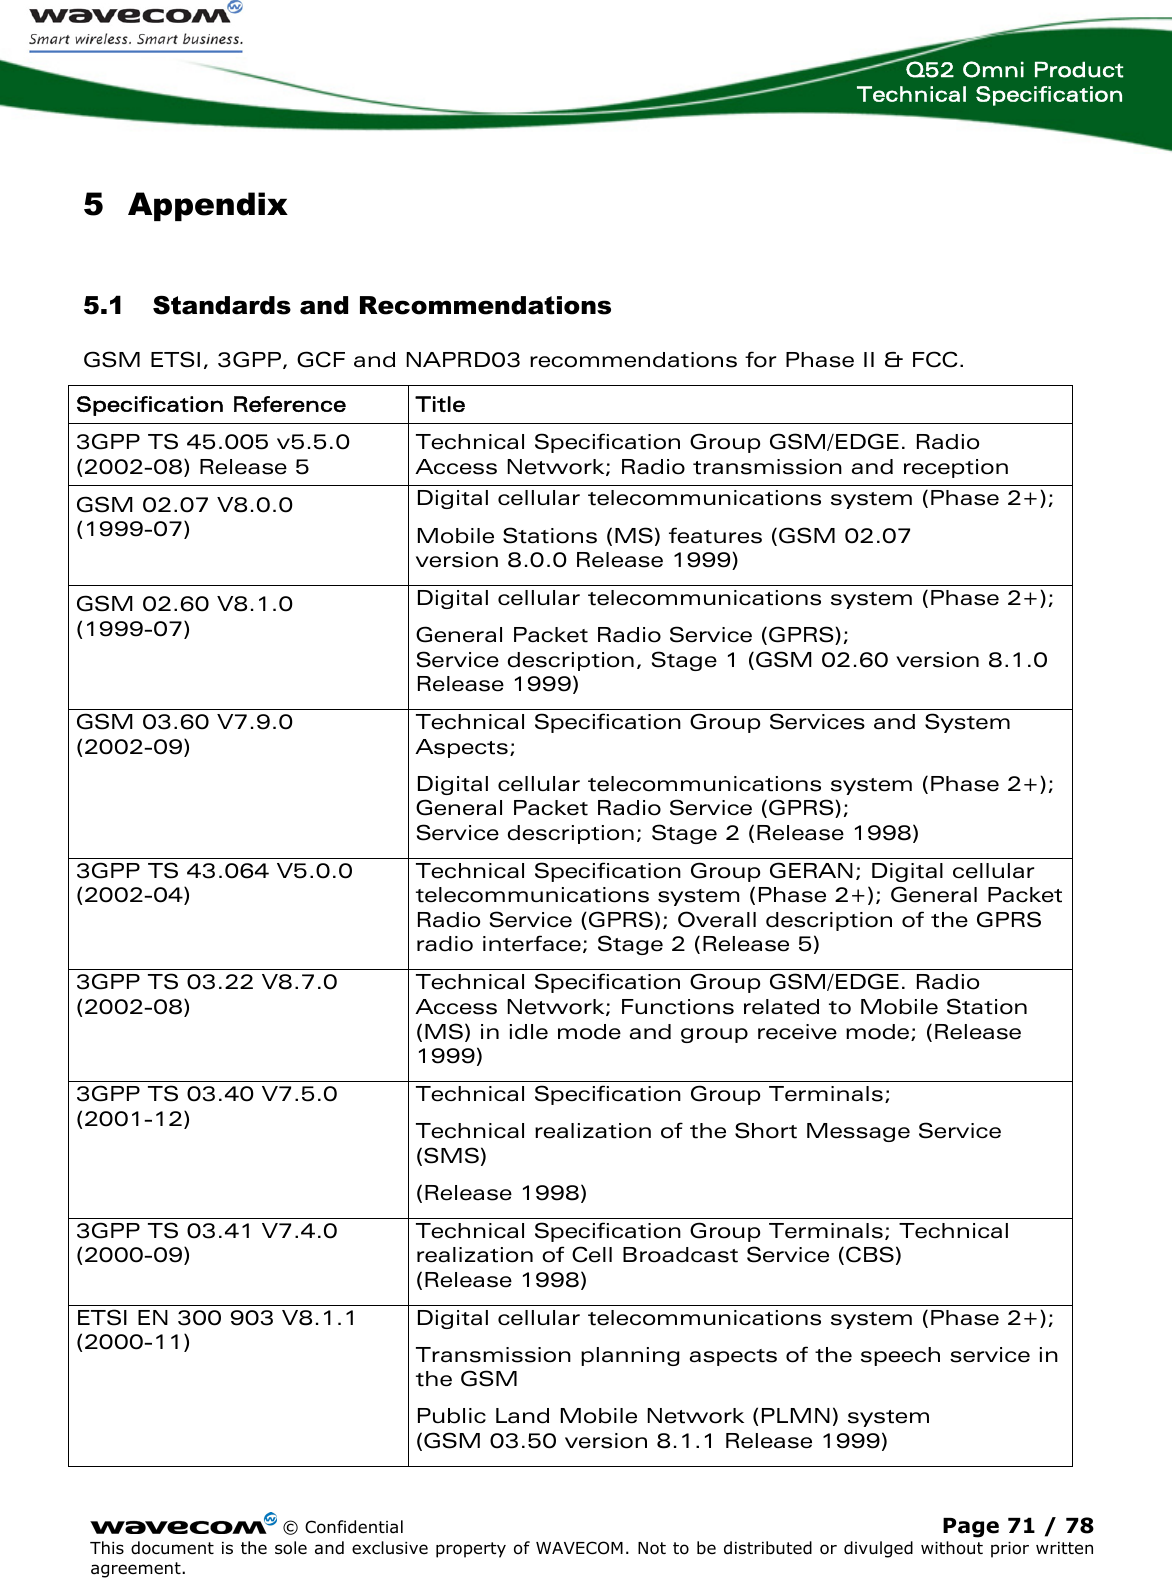  Q52 Omni Product Technical Specification    © Confidential Page 71 / 78 This document is the sole and exclusive property of WAVECOM. Not to be distributed or divulged without prior written agreement.  5 Appendix 5.1 Standards and Recommendations GSM ETSI, 3GPP, GCF and NAPRD03 recommendations for Phase II &amp; FCC. Specification Reference  Title 3GPP TS 45.005 v5.5.0 (2002-08) Release 5  Technical Specification Group GSM/EDGE. Radio Access Network; Radio transmission and reception GSM 02.07 V8.0.0  (1999-07) Digital cellular telecommunications system (Phase 2+); Mobile Stations (MS) features (GSM 02.07  version 8.0.0 Release 1999) GSM 02.60 V8.1.0  (1999-07) Digital cellular telecommunications system (Phase 2+); General Packet Radio Service (GPRS);  Service description, Stage 1 (GSM 02.60 version 8.1.0 Release 1999) GSM 03.60 V7.9.0  (2002-09) Technical Specification Group Services and System Aspects; Digital cellular telecommunications system (Phase 2+); General Packet Radio Service (GPRS);  Service description; Stage 2 (Release 1998) 3GPP TS 43.064 V5.0.0 (2002-04) Technical Specification Group GERAN; Digital cellular telecommunications system (Phase 2+); General Packet Radio Service (GPRS); Overall description of the GPRS radio interface; Stage 2 (Release 5) 3GPP TS 03.22 V8.7.0 (2002-08) Technical Specification Group GSM/EDGE. Radio Access Network; Functions related to Mobile Station (MS) in idle mode and group receive mode; (Release 1999) 3GPP TS 03.40 V7.5.0 (2001-12)  Technical Specification Group Terminals; Technical realization of the Short Message Service (SMS) (Release 1998) 3GPP TS 03.41 V7.4.0 (2000-09) Technical Specification Group Terminals; Technical realization of Cell Broadcast Service (CBS)  (Release 1998) ETSI EN 300 903 V8.1.1 (2000-11) Digital cellular telecommunications system (Phase 2+); Transmission planning aspects of the speech service in the GSM Public Land Mobile Network (PLMN) system  (GSM 03.50 version 8.1.1 Release 1999) 